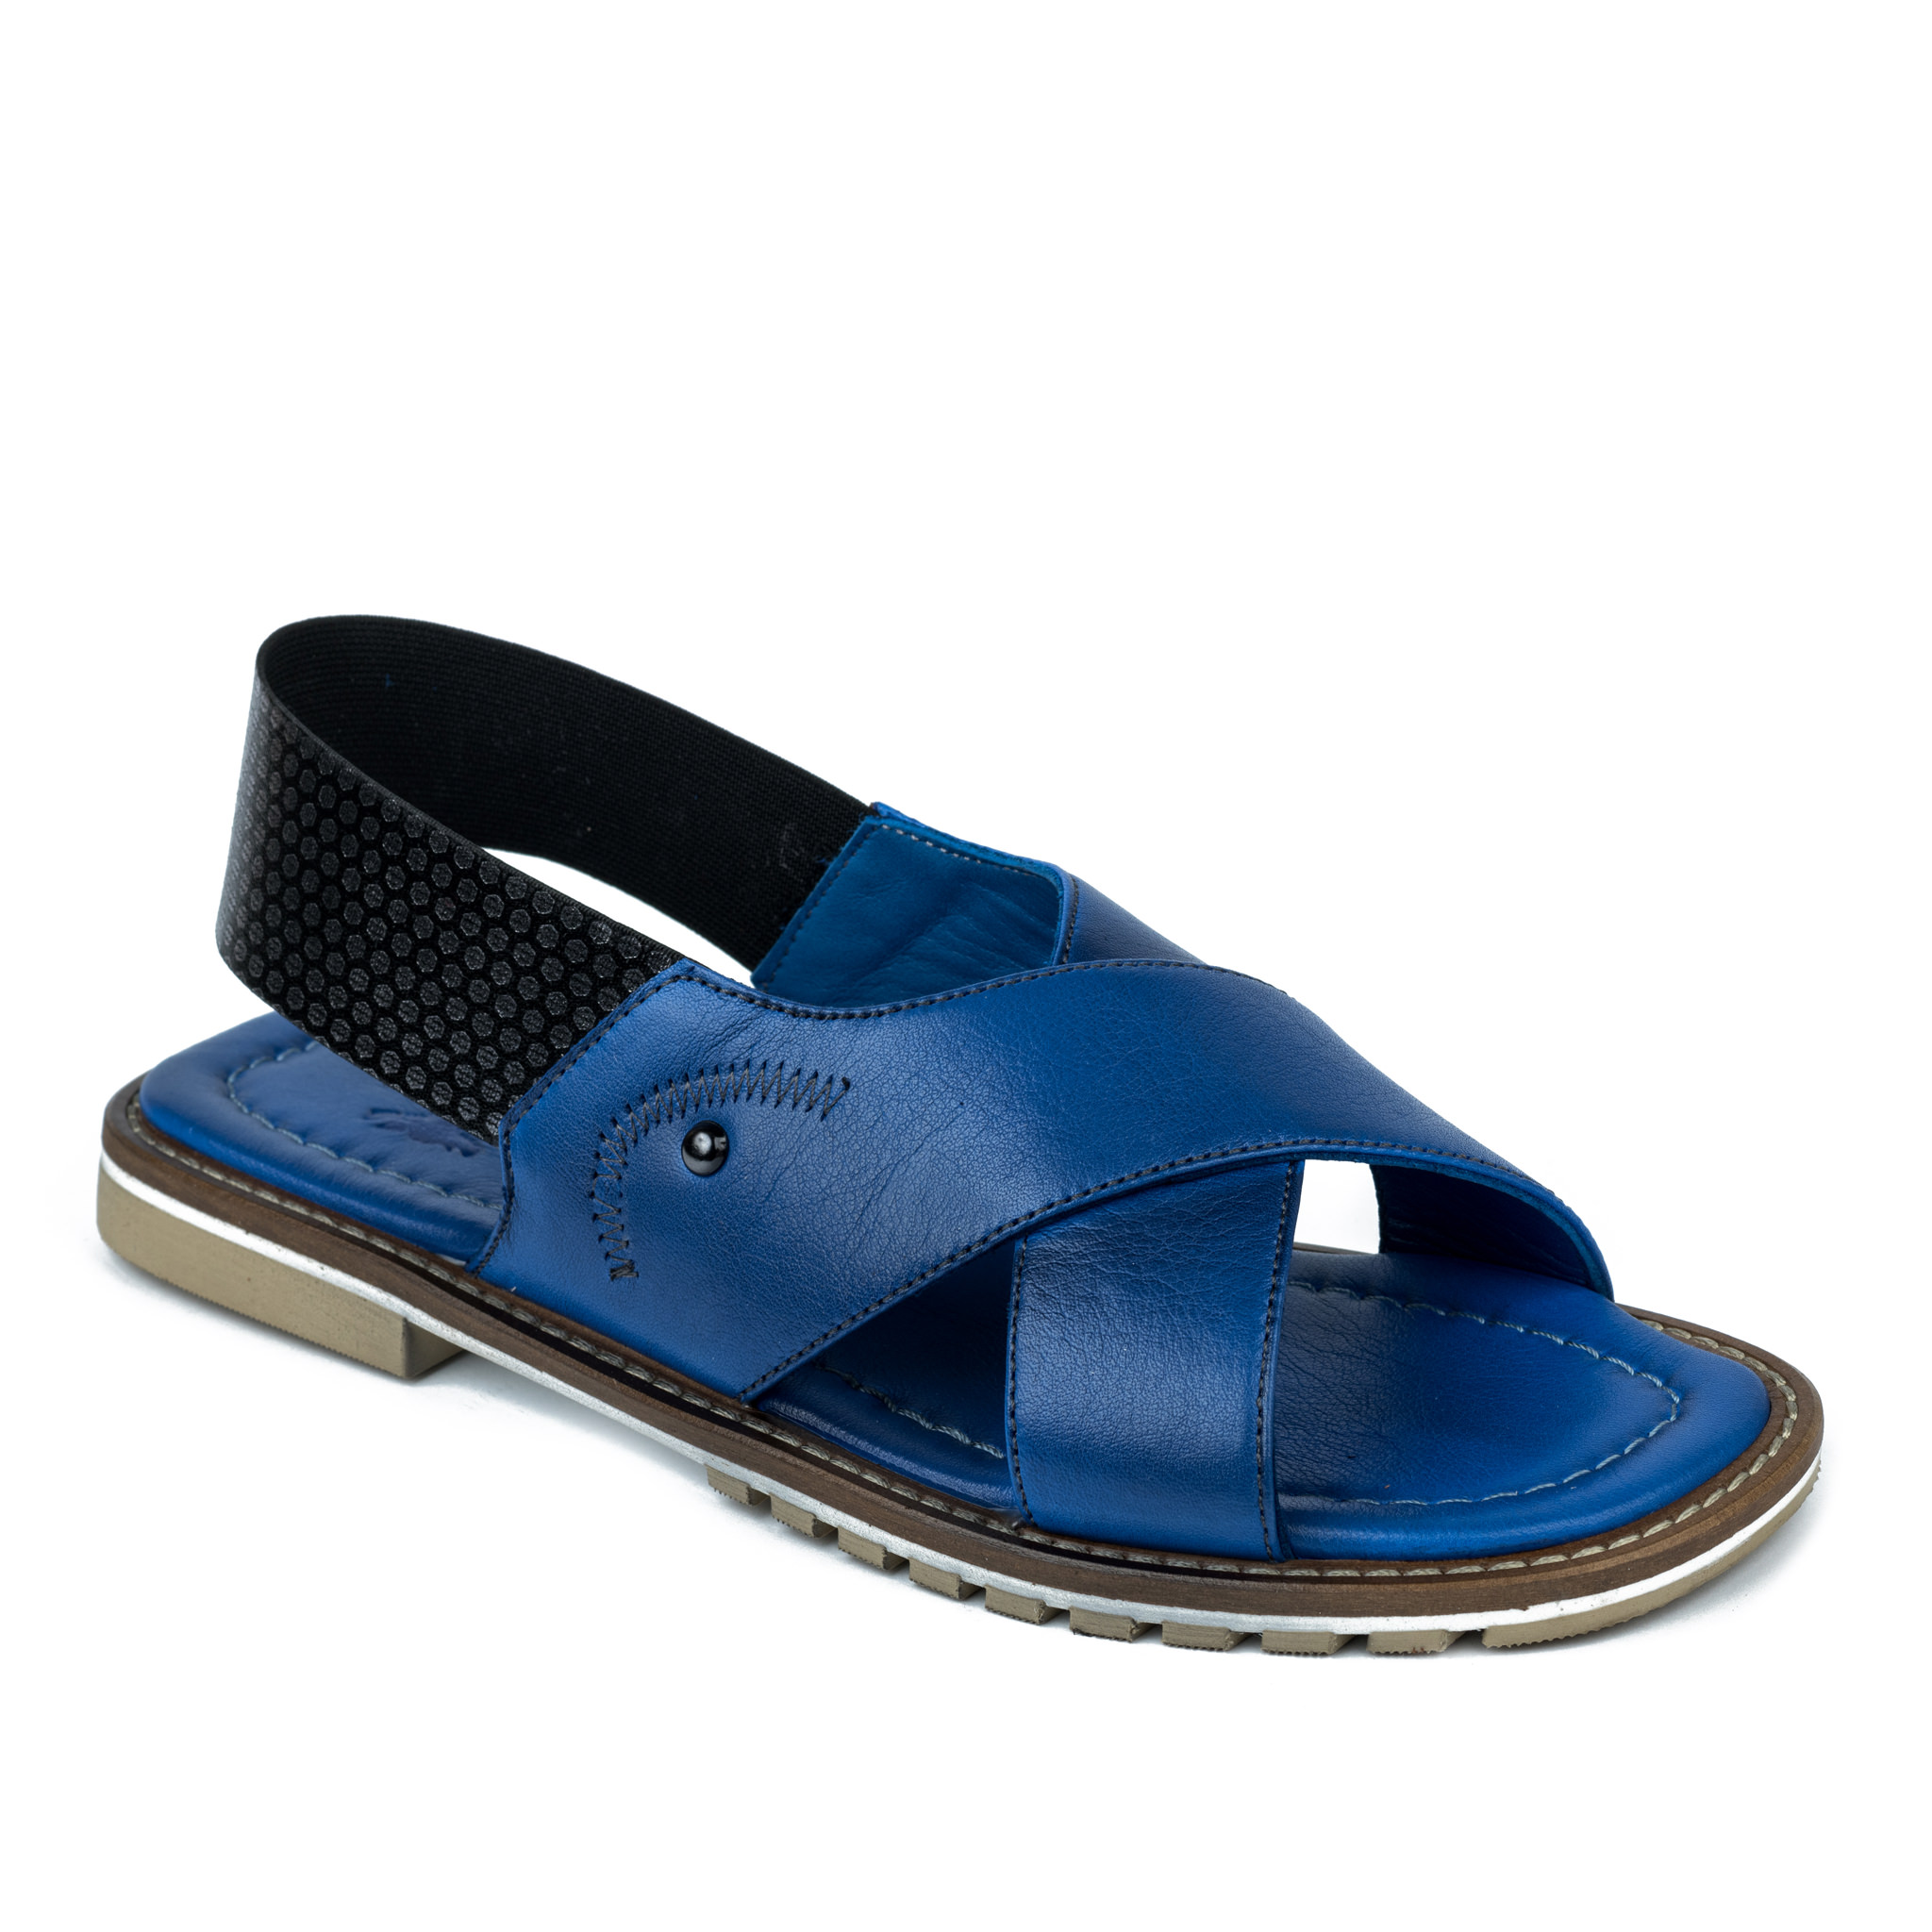 Leather sandals A197 - BLUE